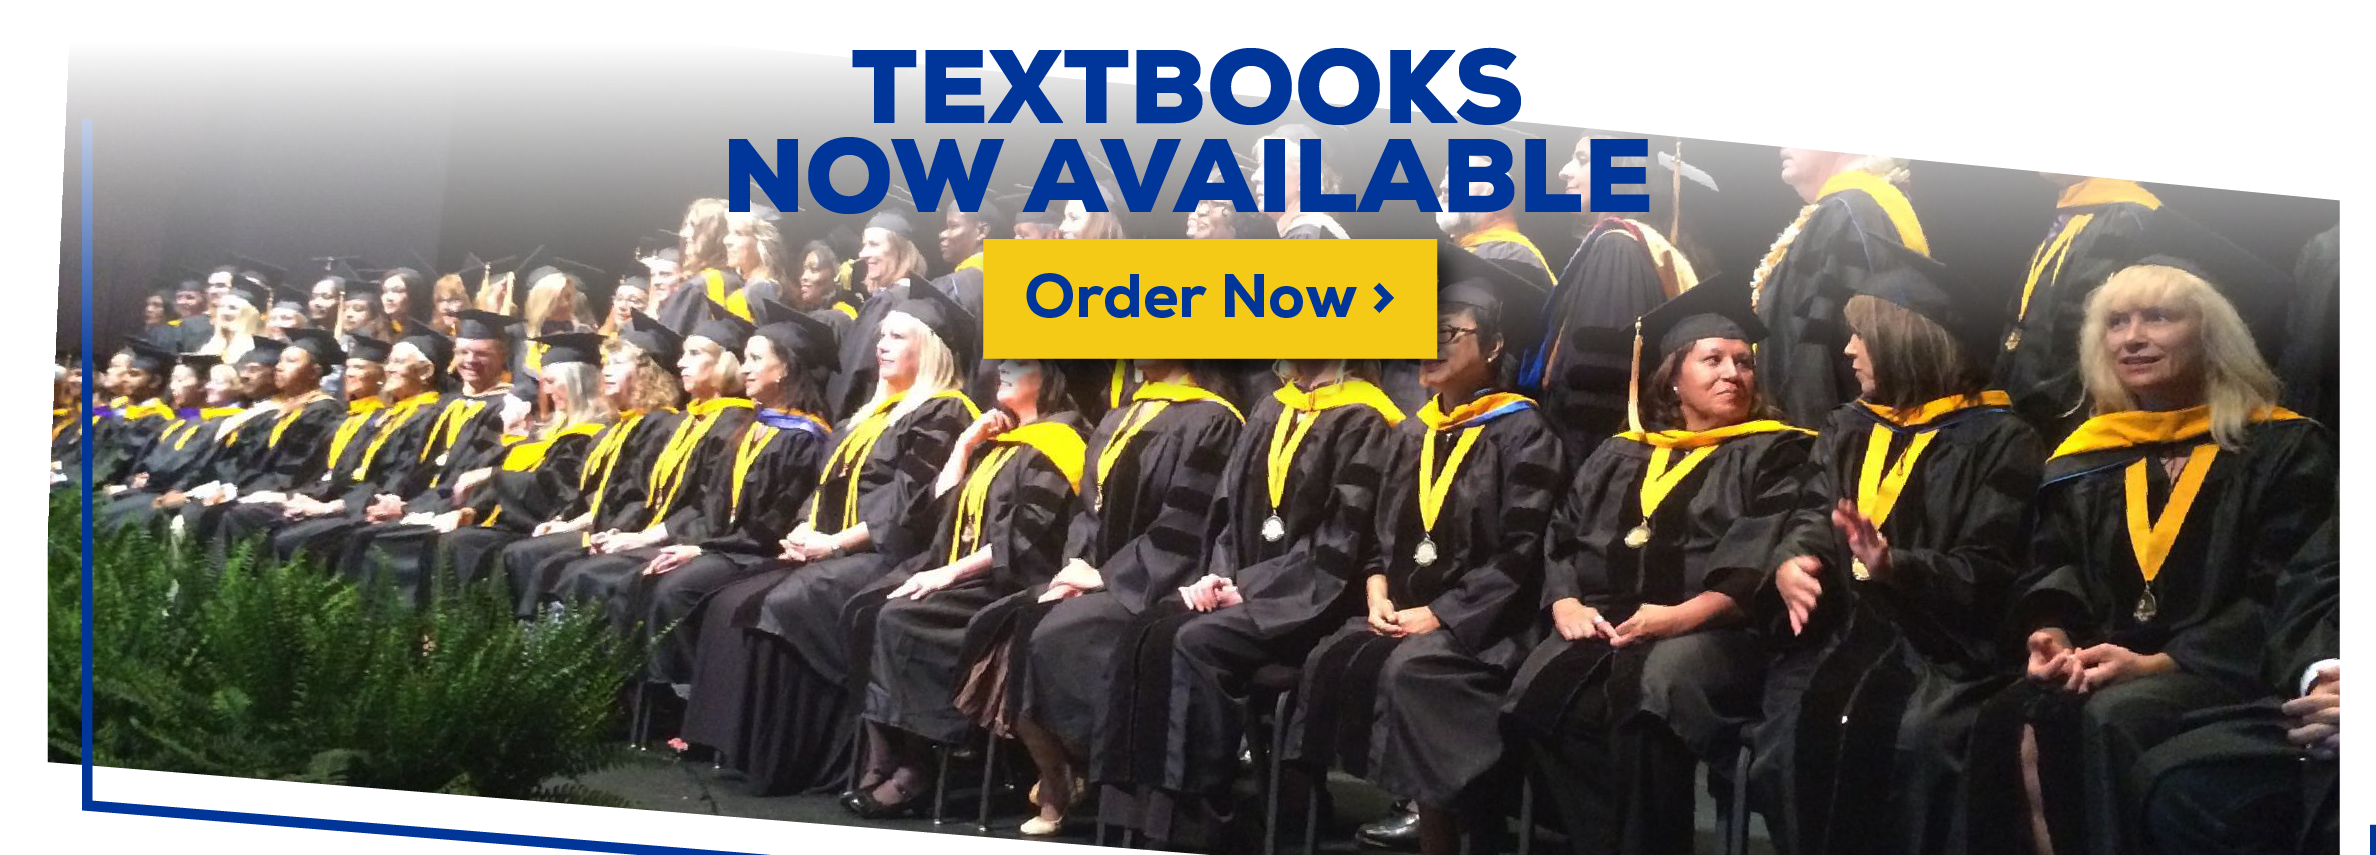 Textbooks Now Available. order now